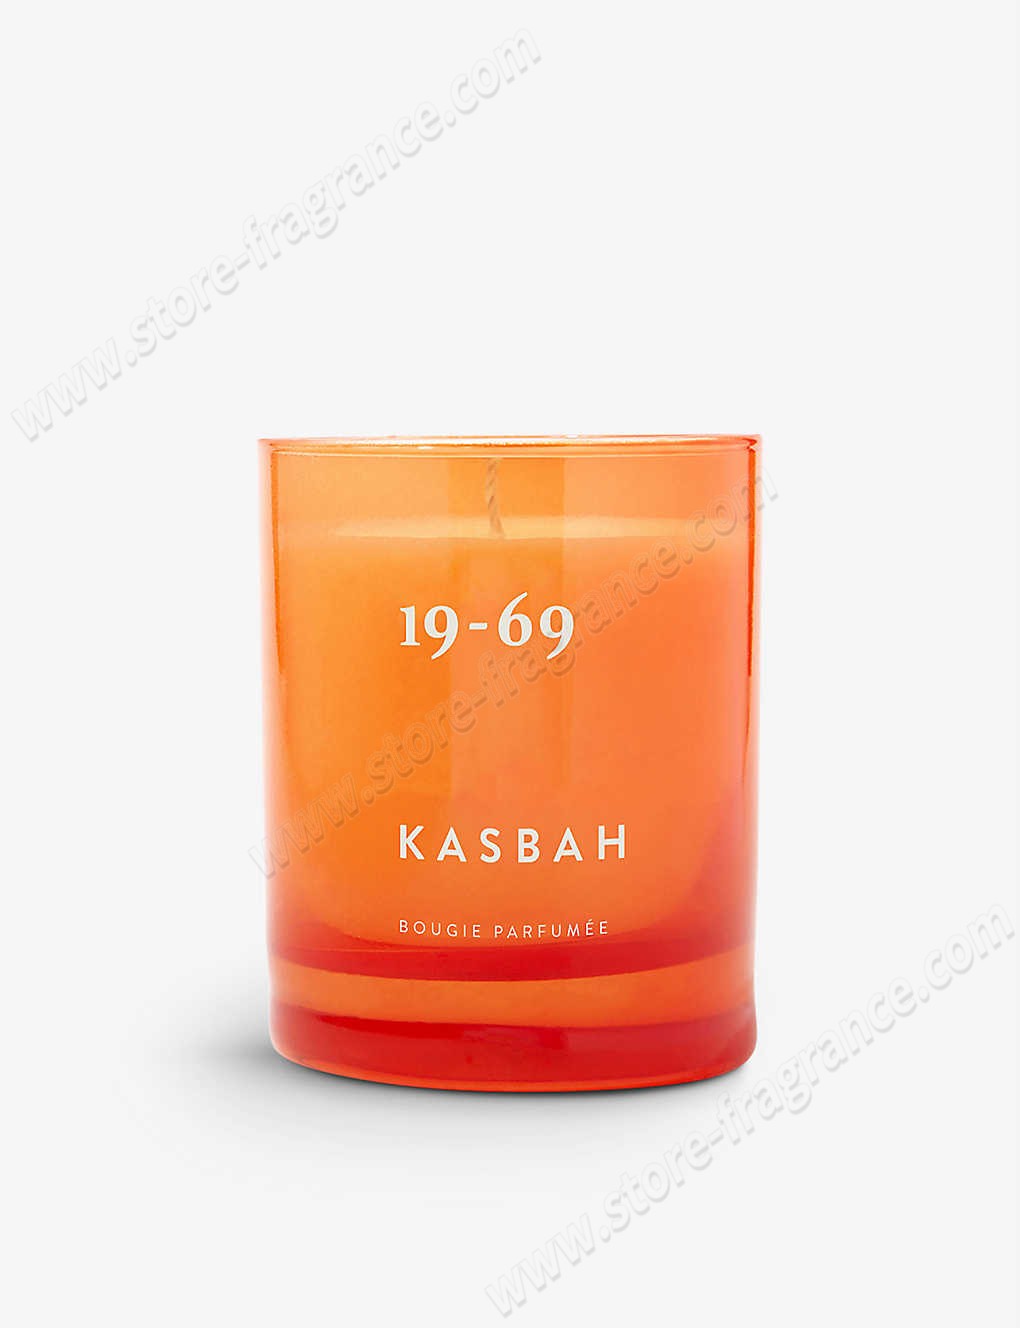 19-69/Kasbah vegetable-wax scented candle 200ml ✿ Discount Store - 19-69/Kasbah vegetable-wax scented candle 200ml ✿ Discount Store